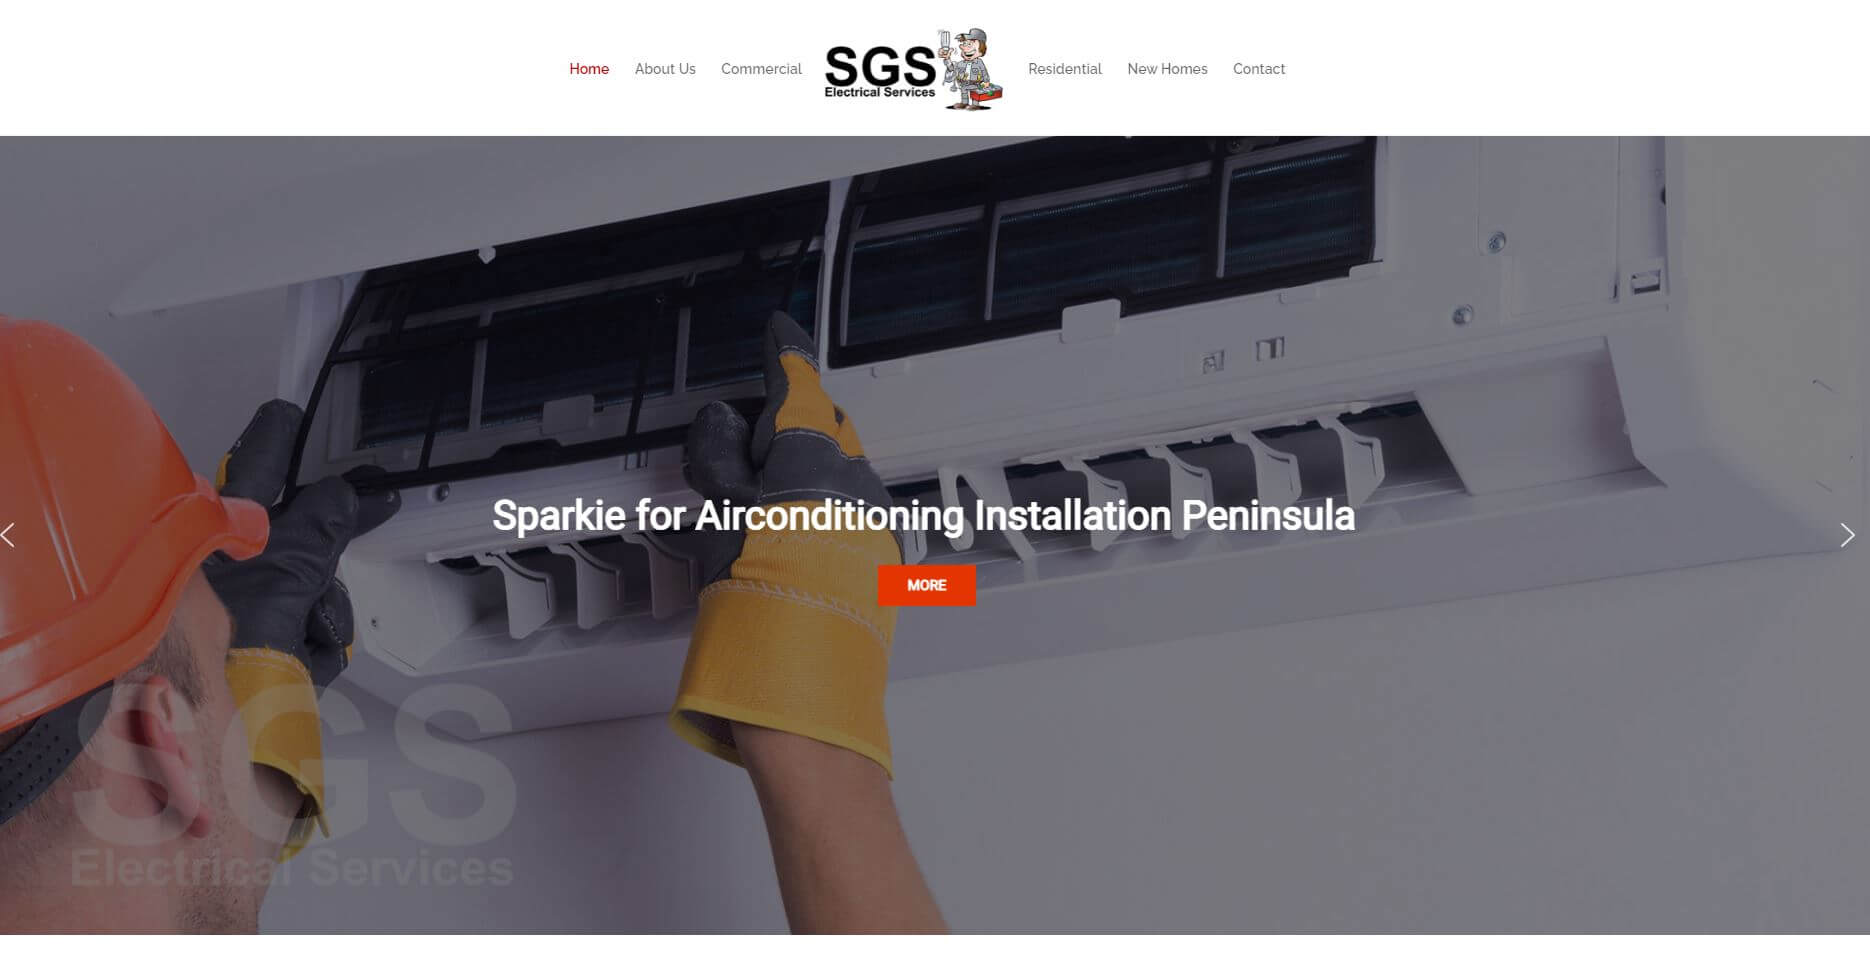 Sgs Electrical Services